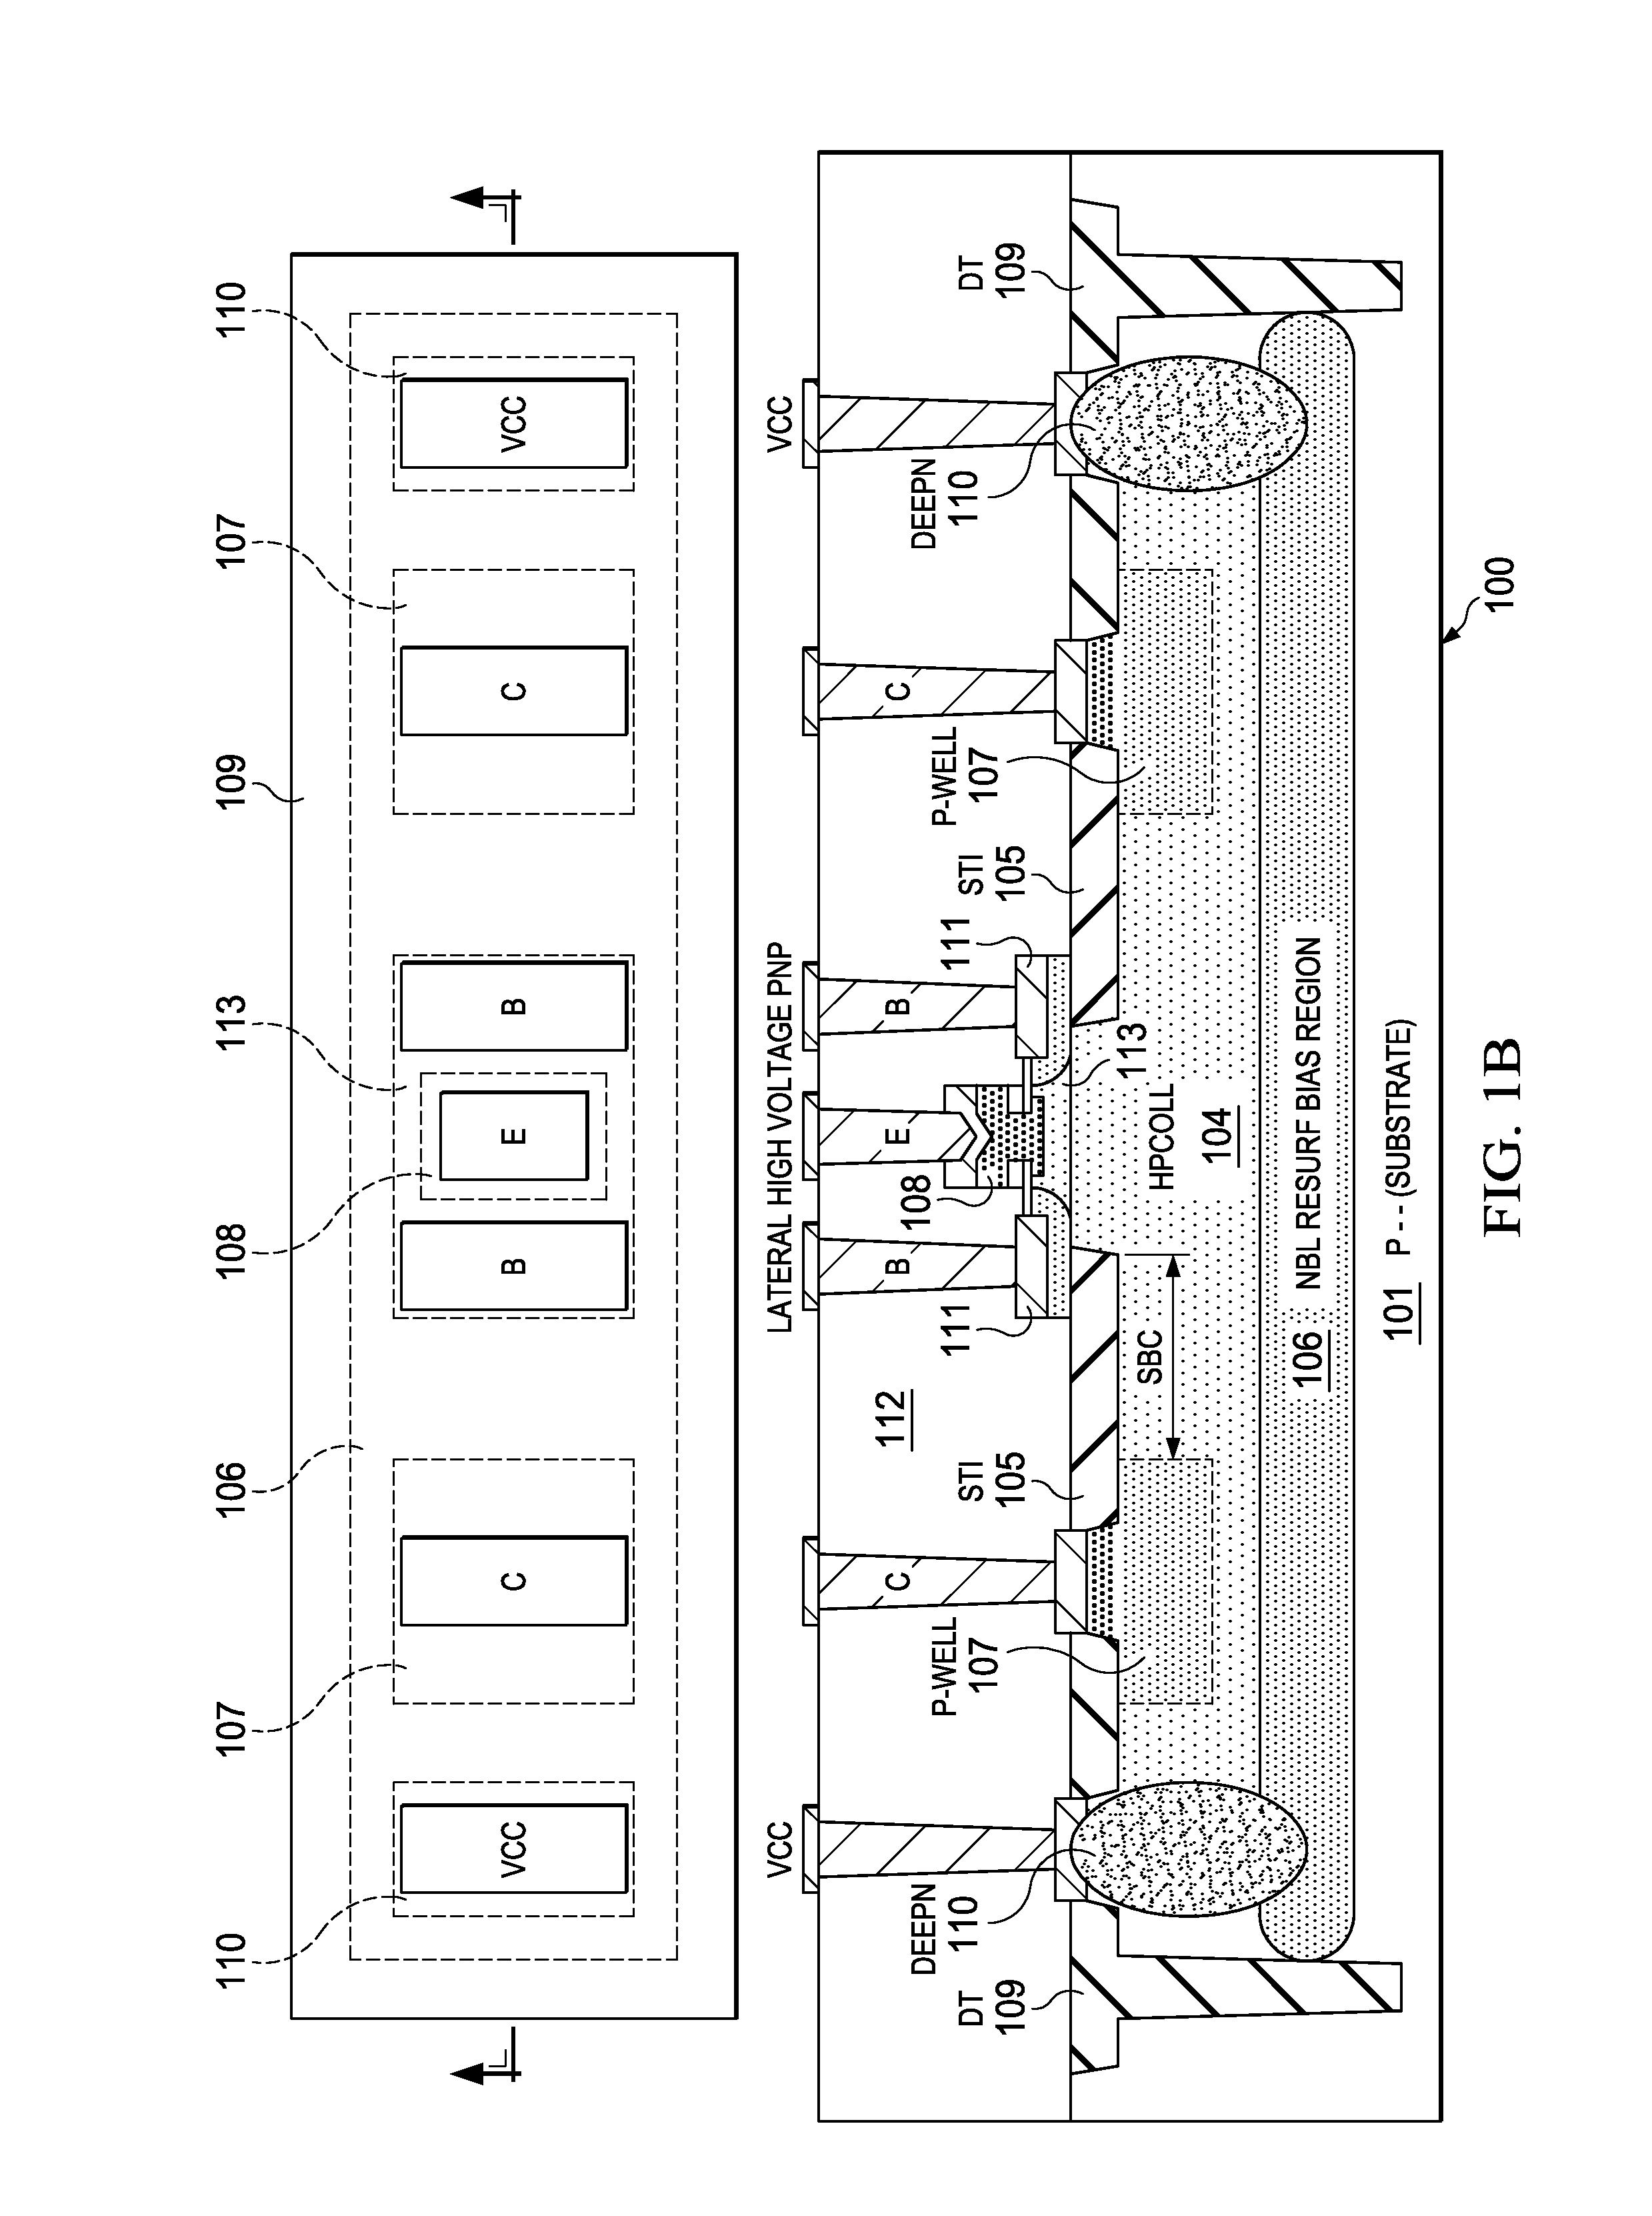 Method for creating the high voltage complementary bjt with lateral collector on bulk substrate with resurf effect